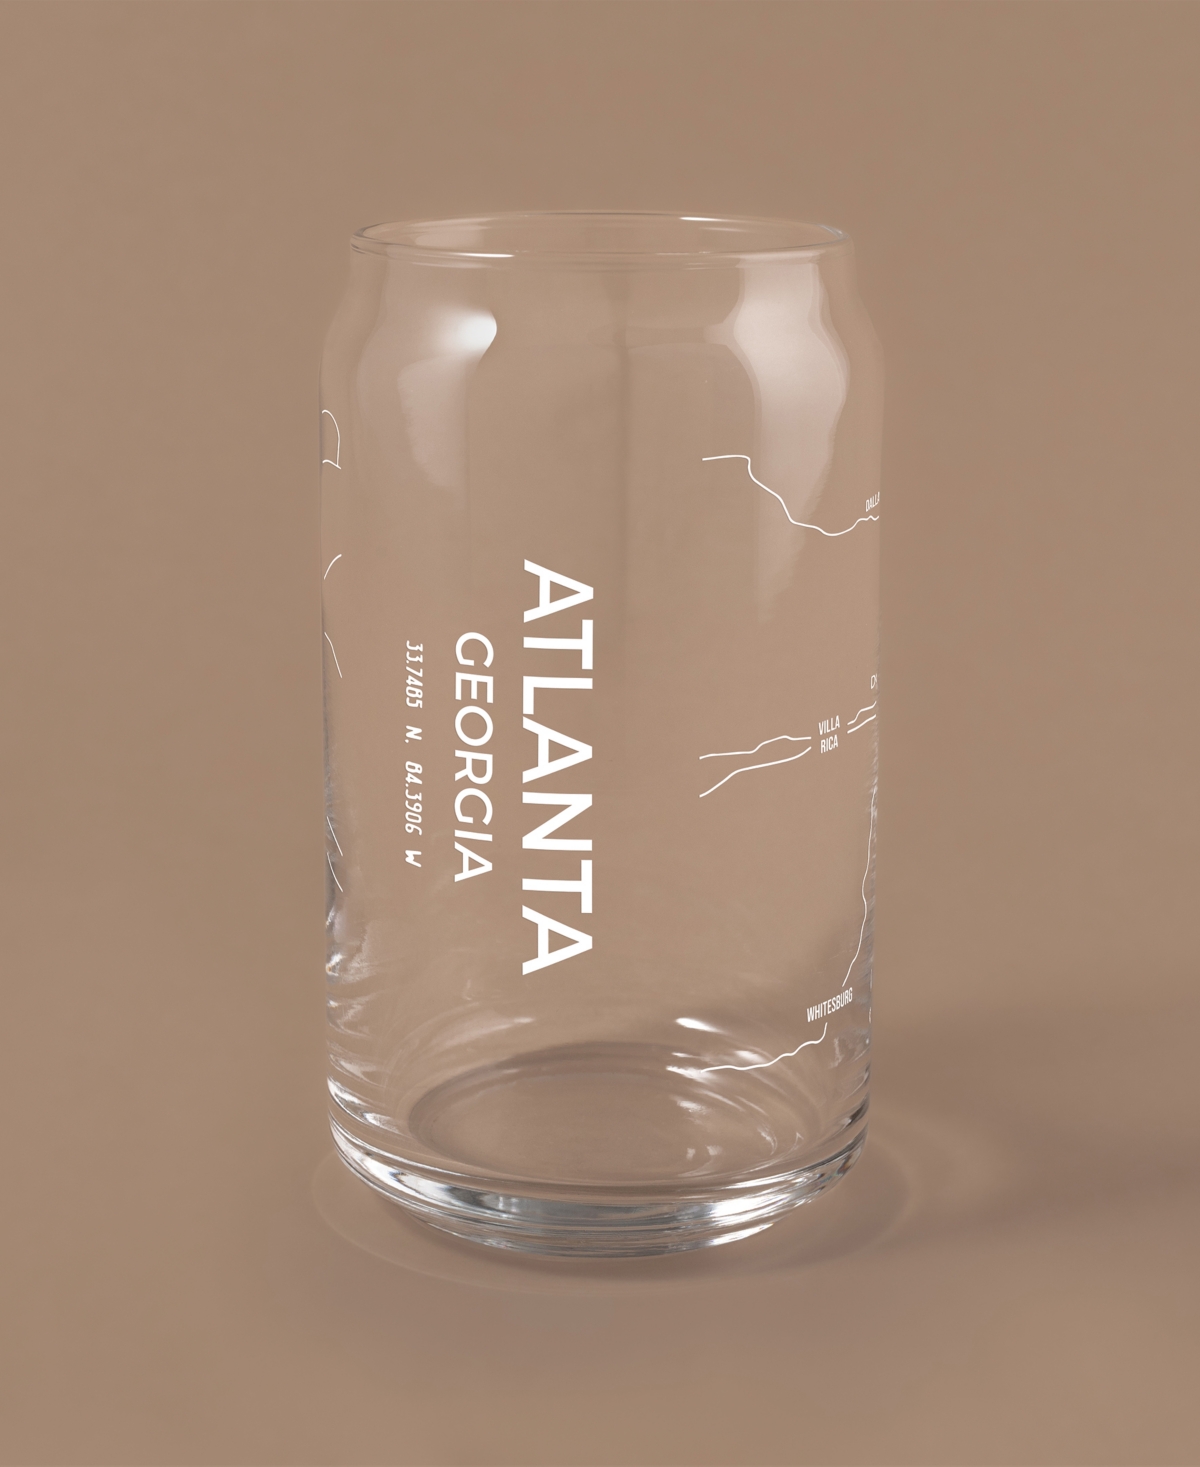 Shop Narbo The Can Atlanta Map 16 oz Everyday Glassware, Set Of 2 In White